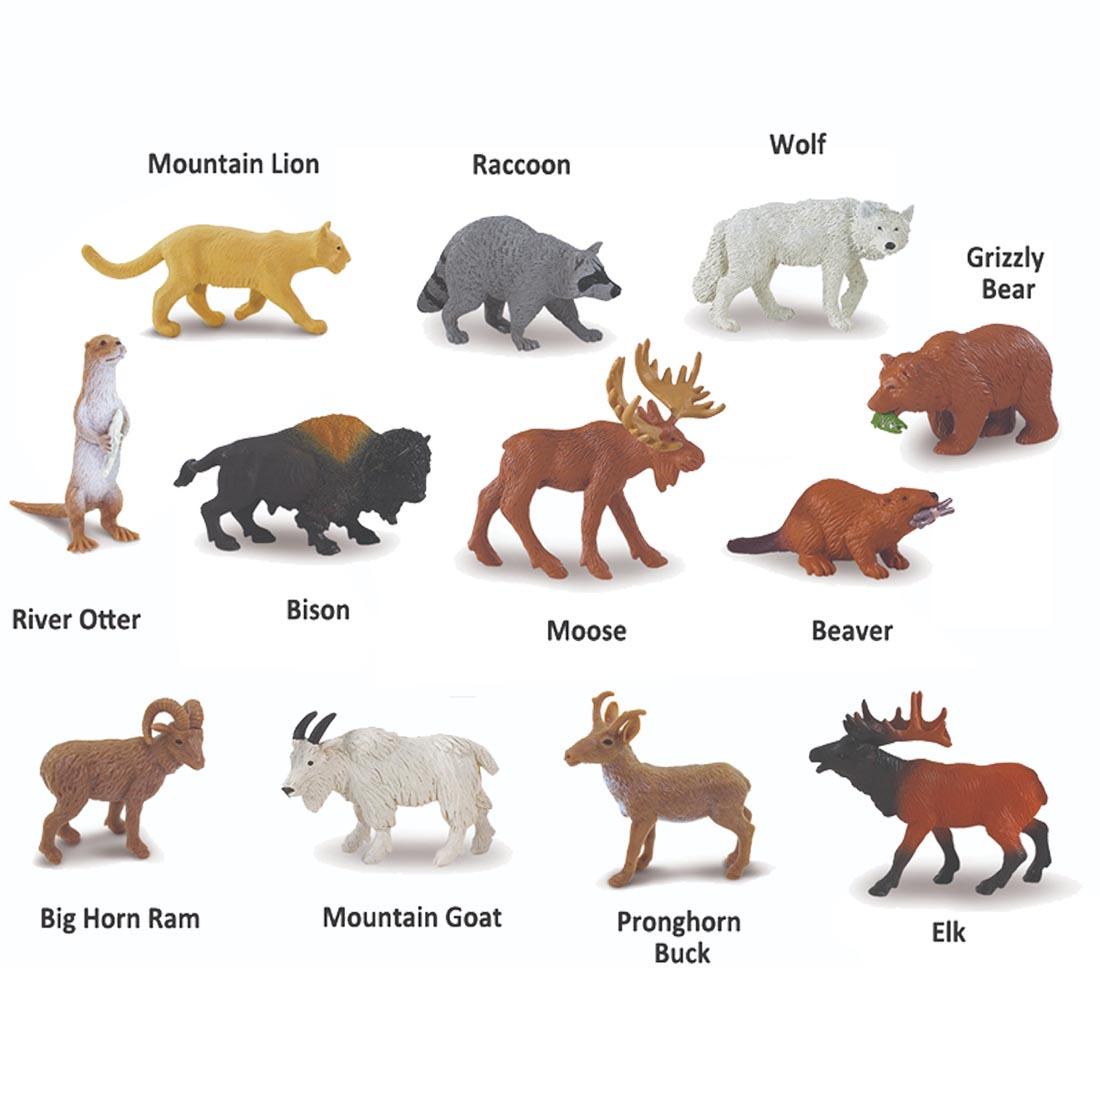 12 creatures from North American Wildlife Figurines labeled with their names: mountain lion, raccoon, wolf, grizzly bear, river otter, bison, moose, beaver, big horn ram, mountain goat, pronghorn buc